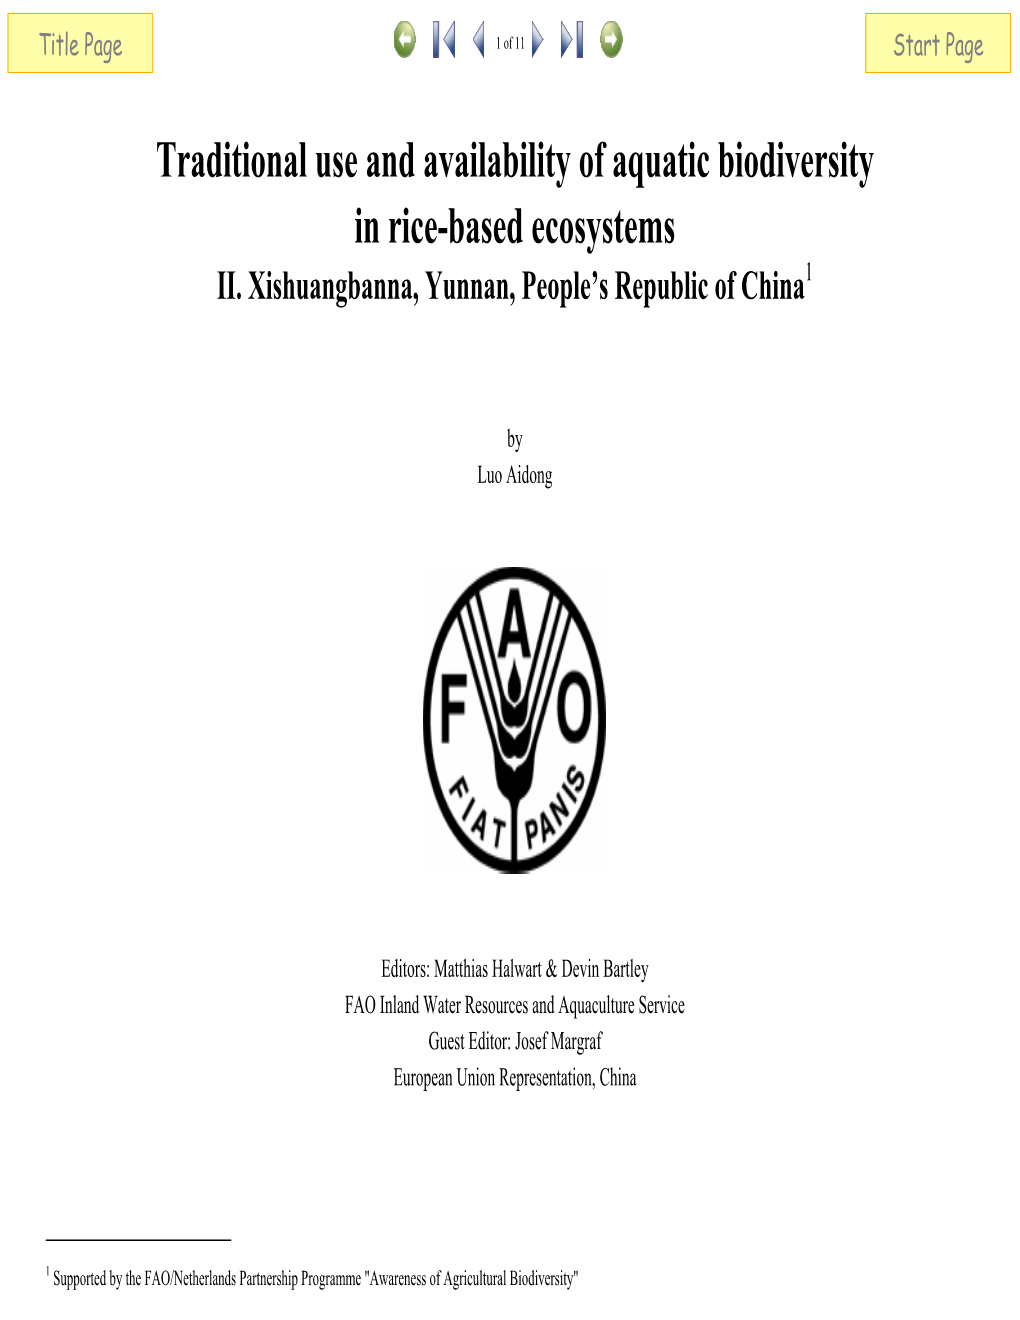 Traditional Use and Availability of Aquatic Biodiversity in Rice-Based Ecosystems of Xishuangbanna, Yunnan, China